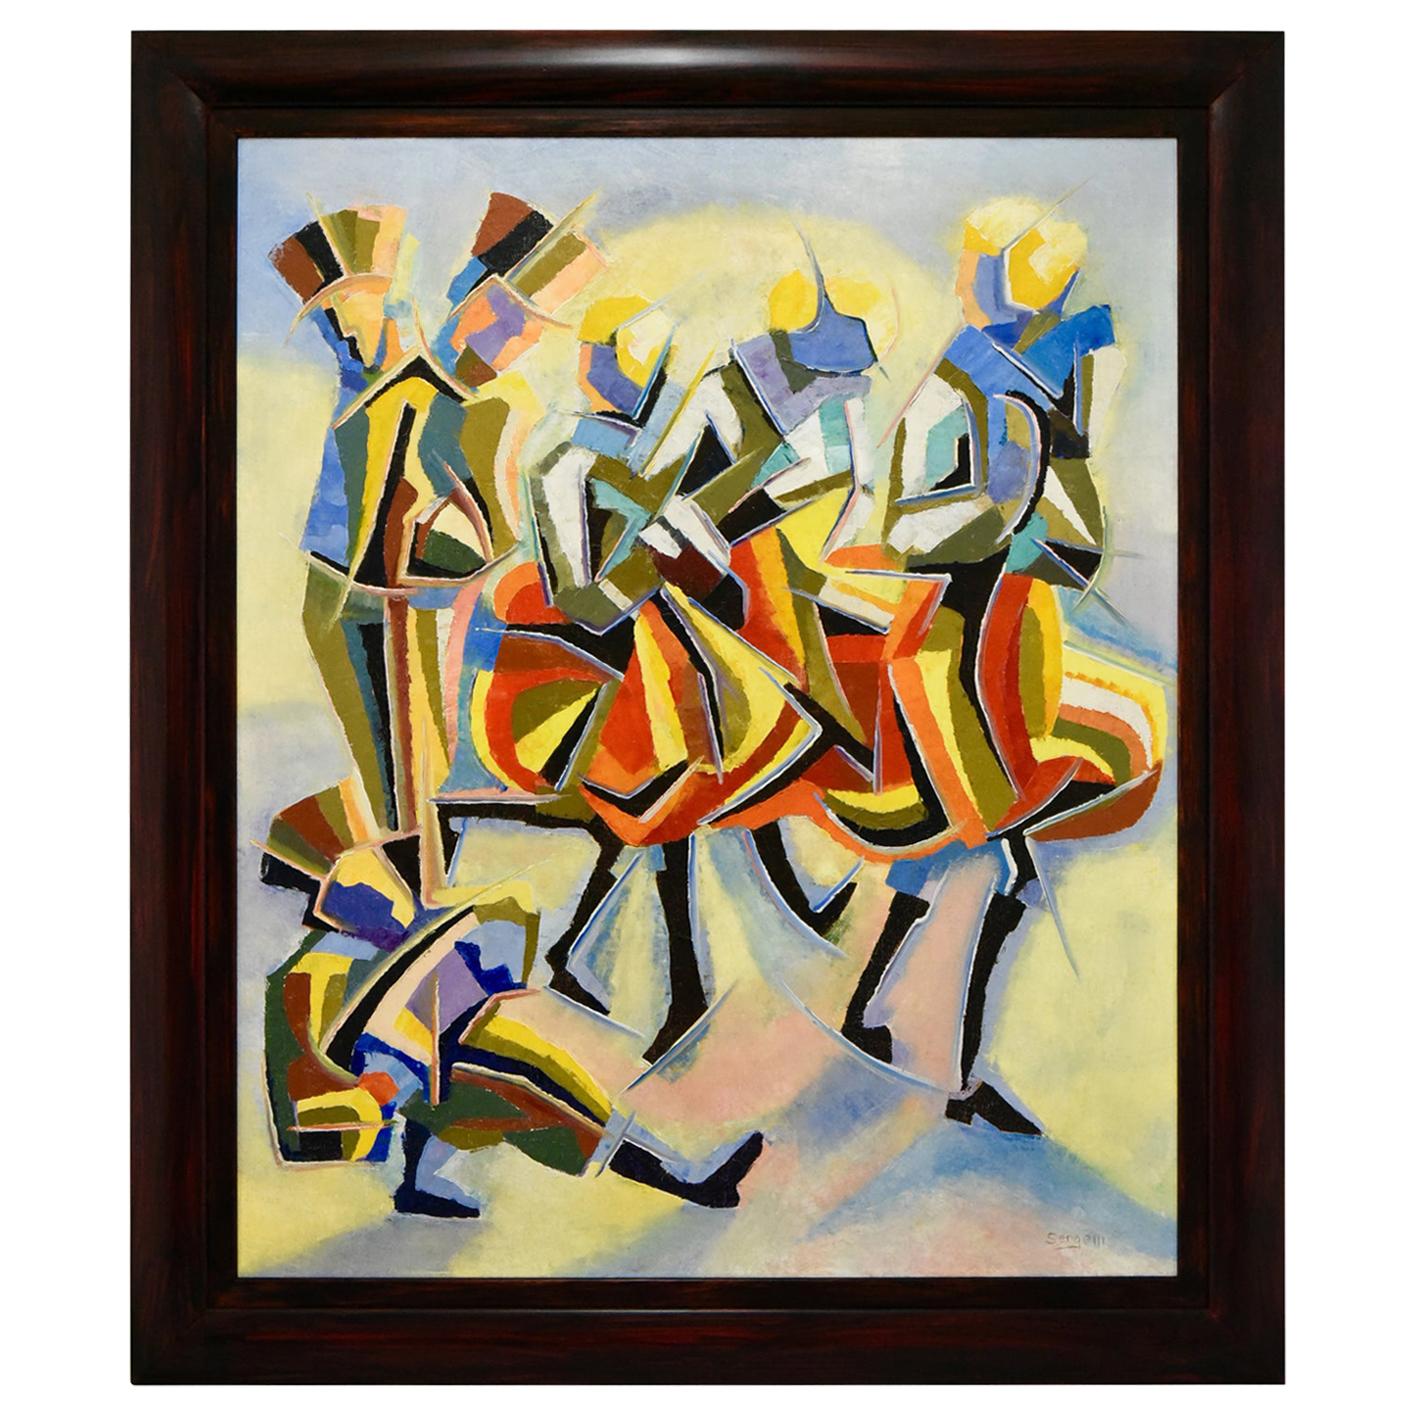 Cubist Oil Painting of Dancers and Musicians Serge Magnin, 1960, France